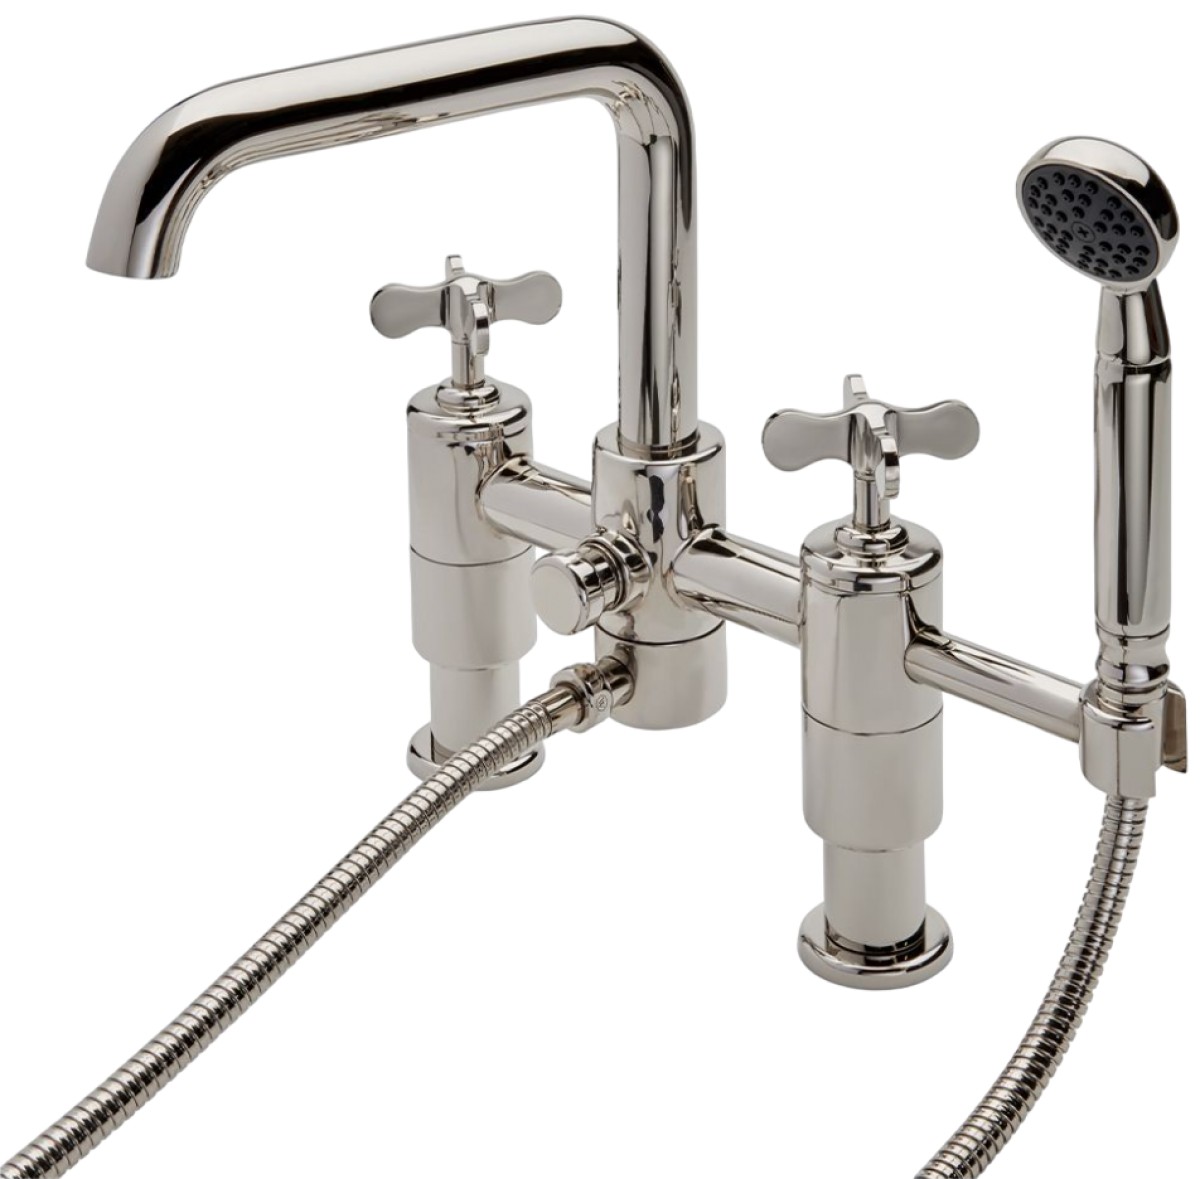 Ludlow Deck Mounted Exposed Tub Filler with Handshower and Cross Handles